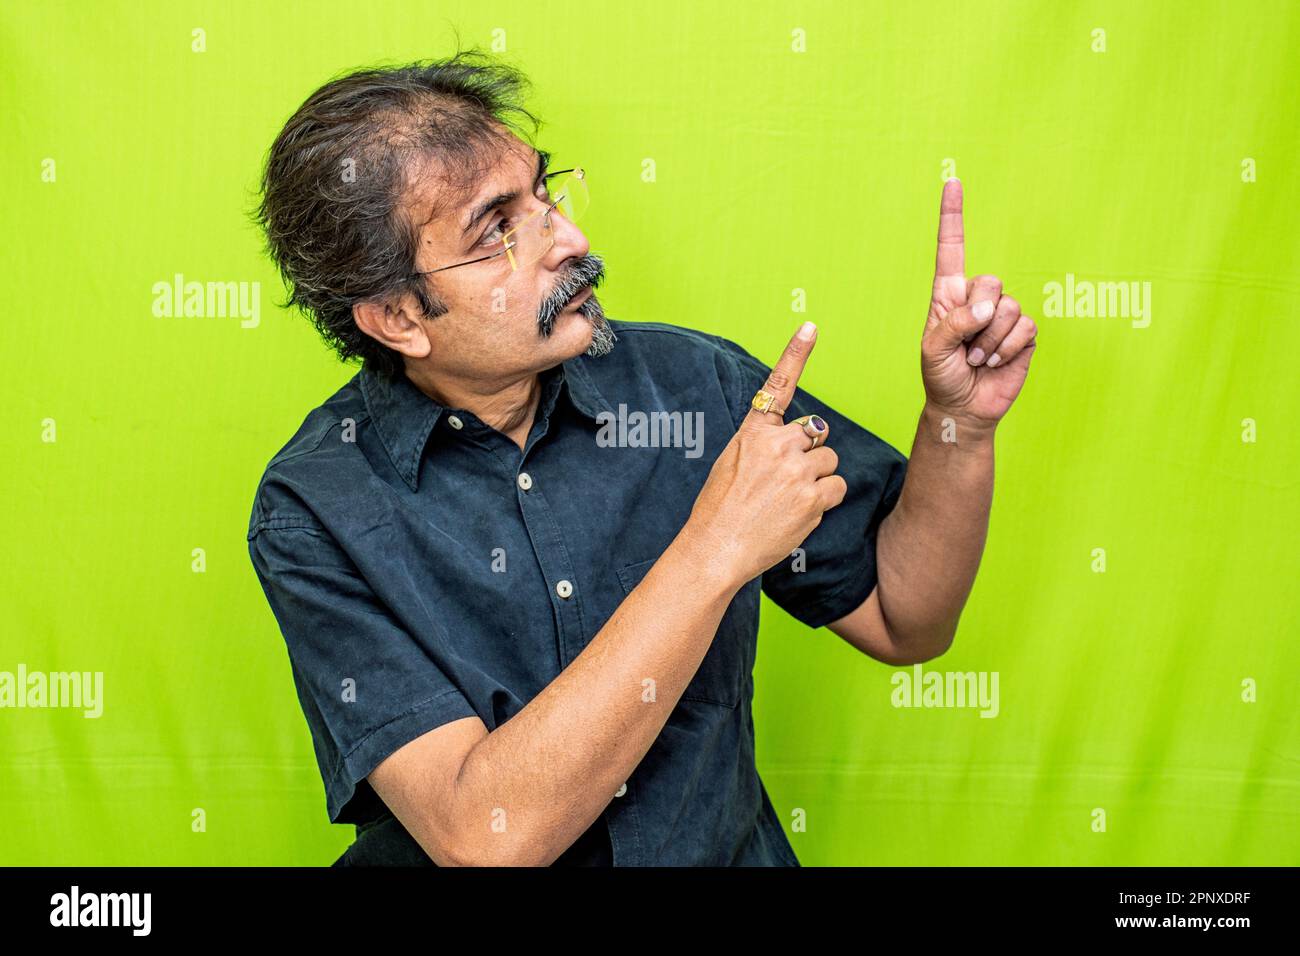 Smart businessman in the black shirt on the green screen points with both hands toward the top-left direction Stock Photo